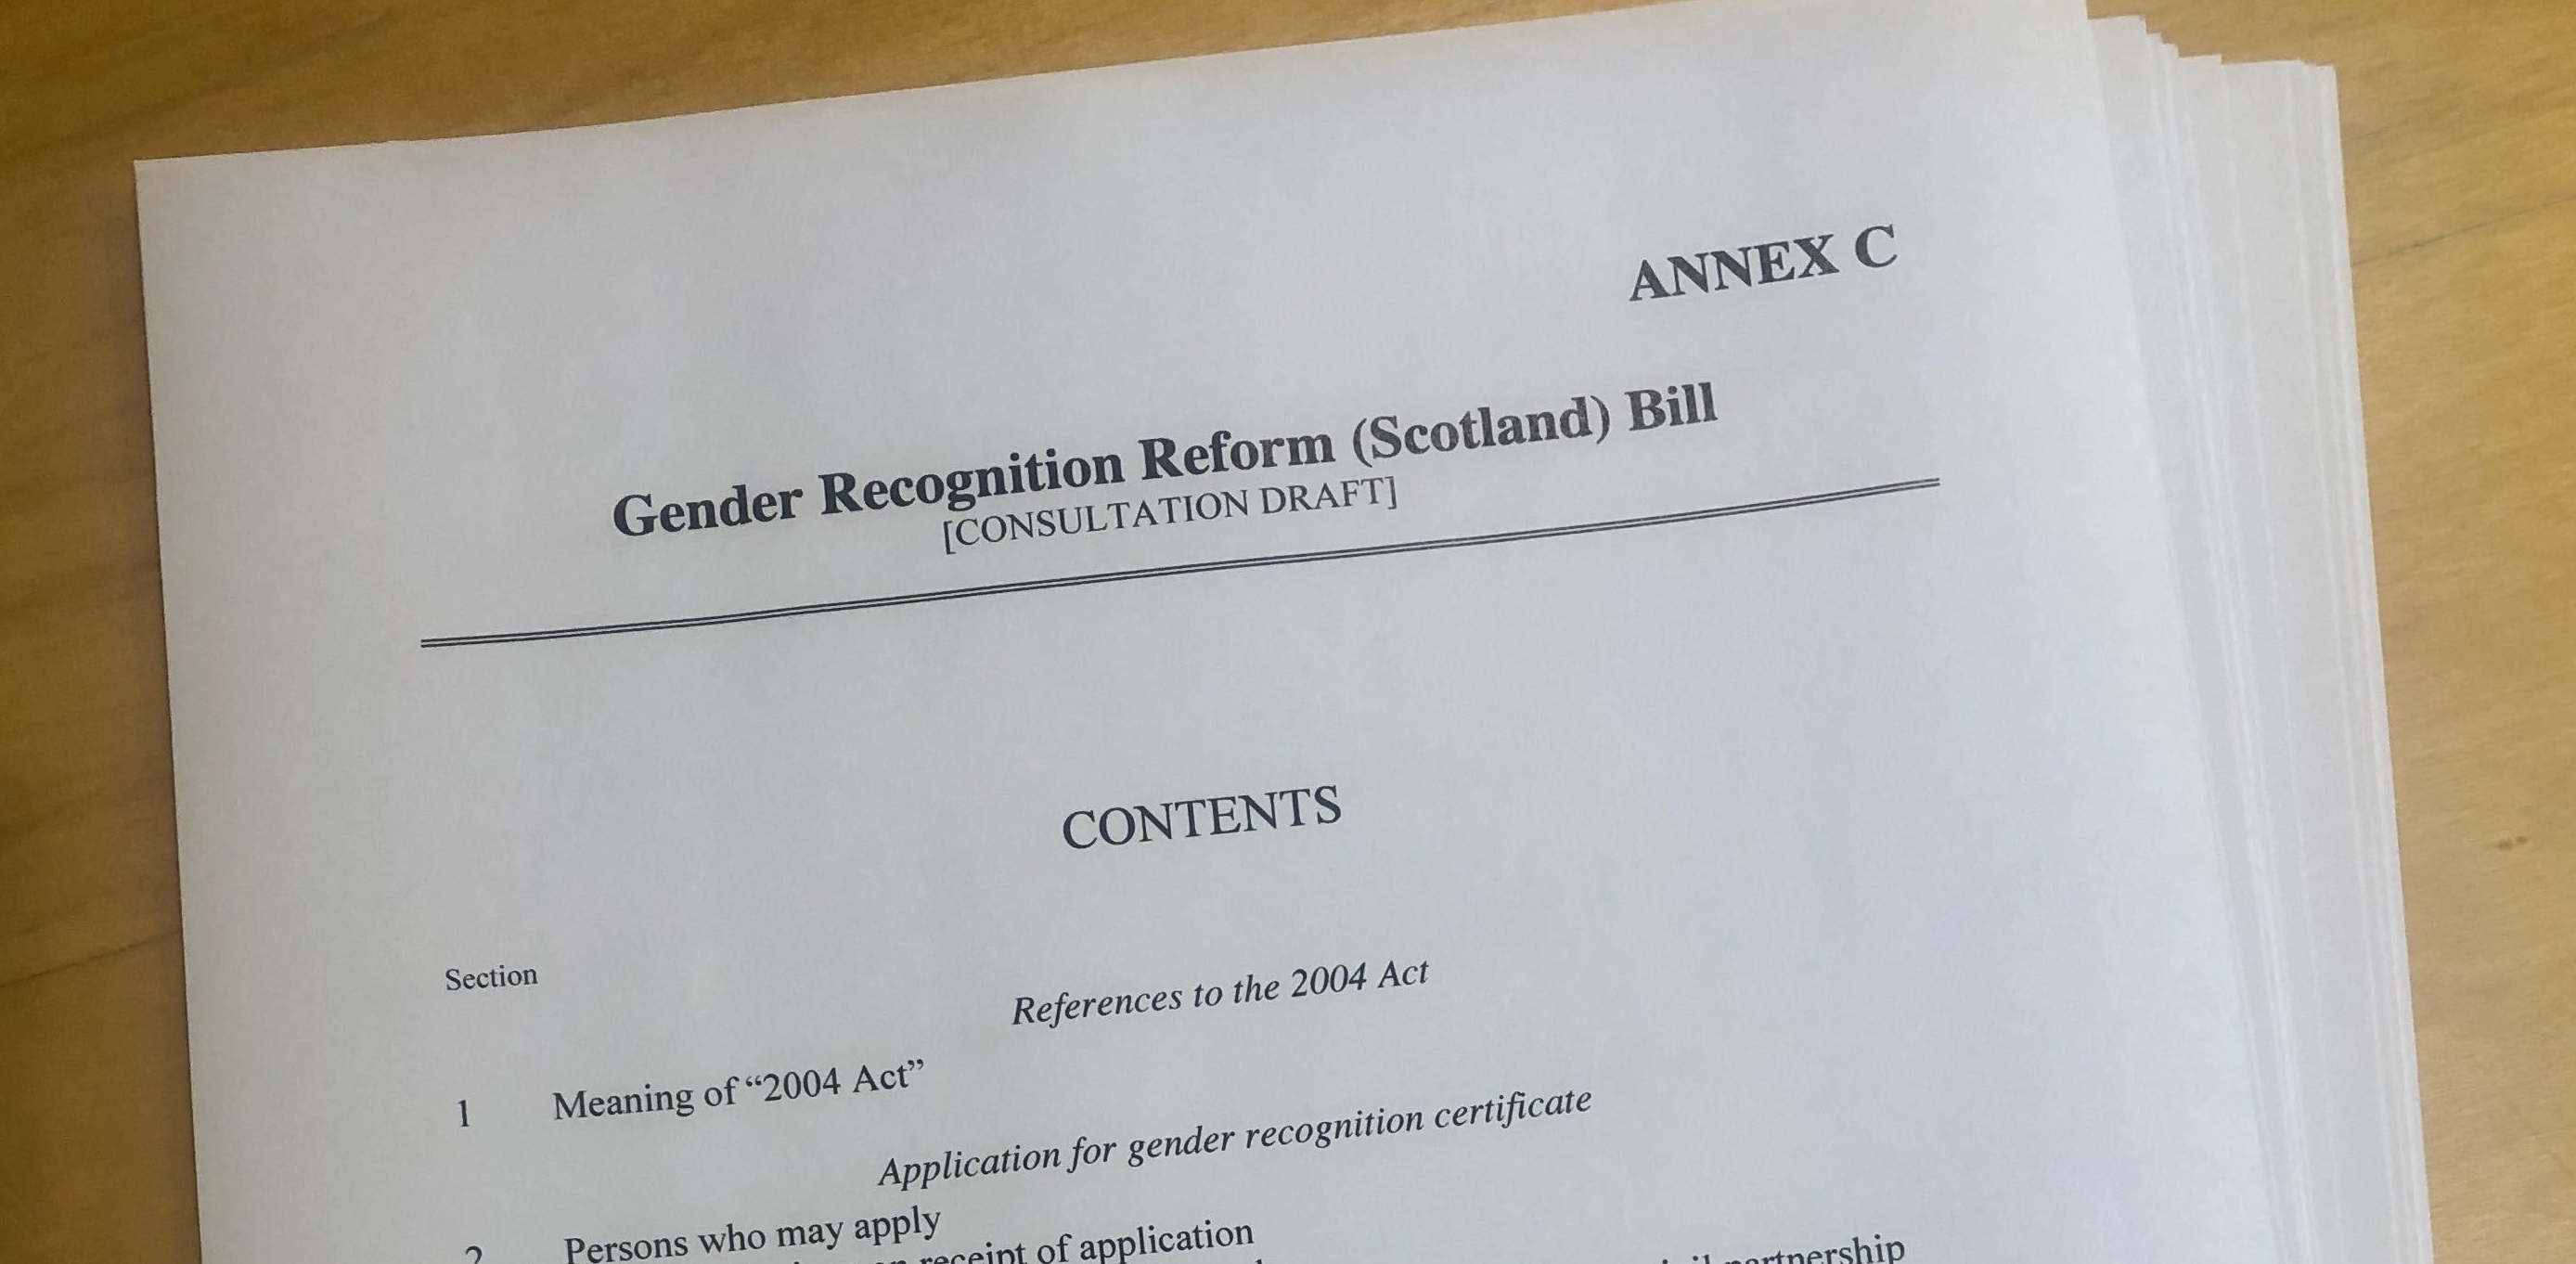 The draft bill sets out the process for Scotland's devolved gender recognition system